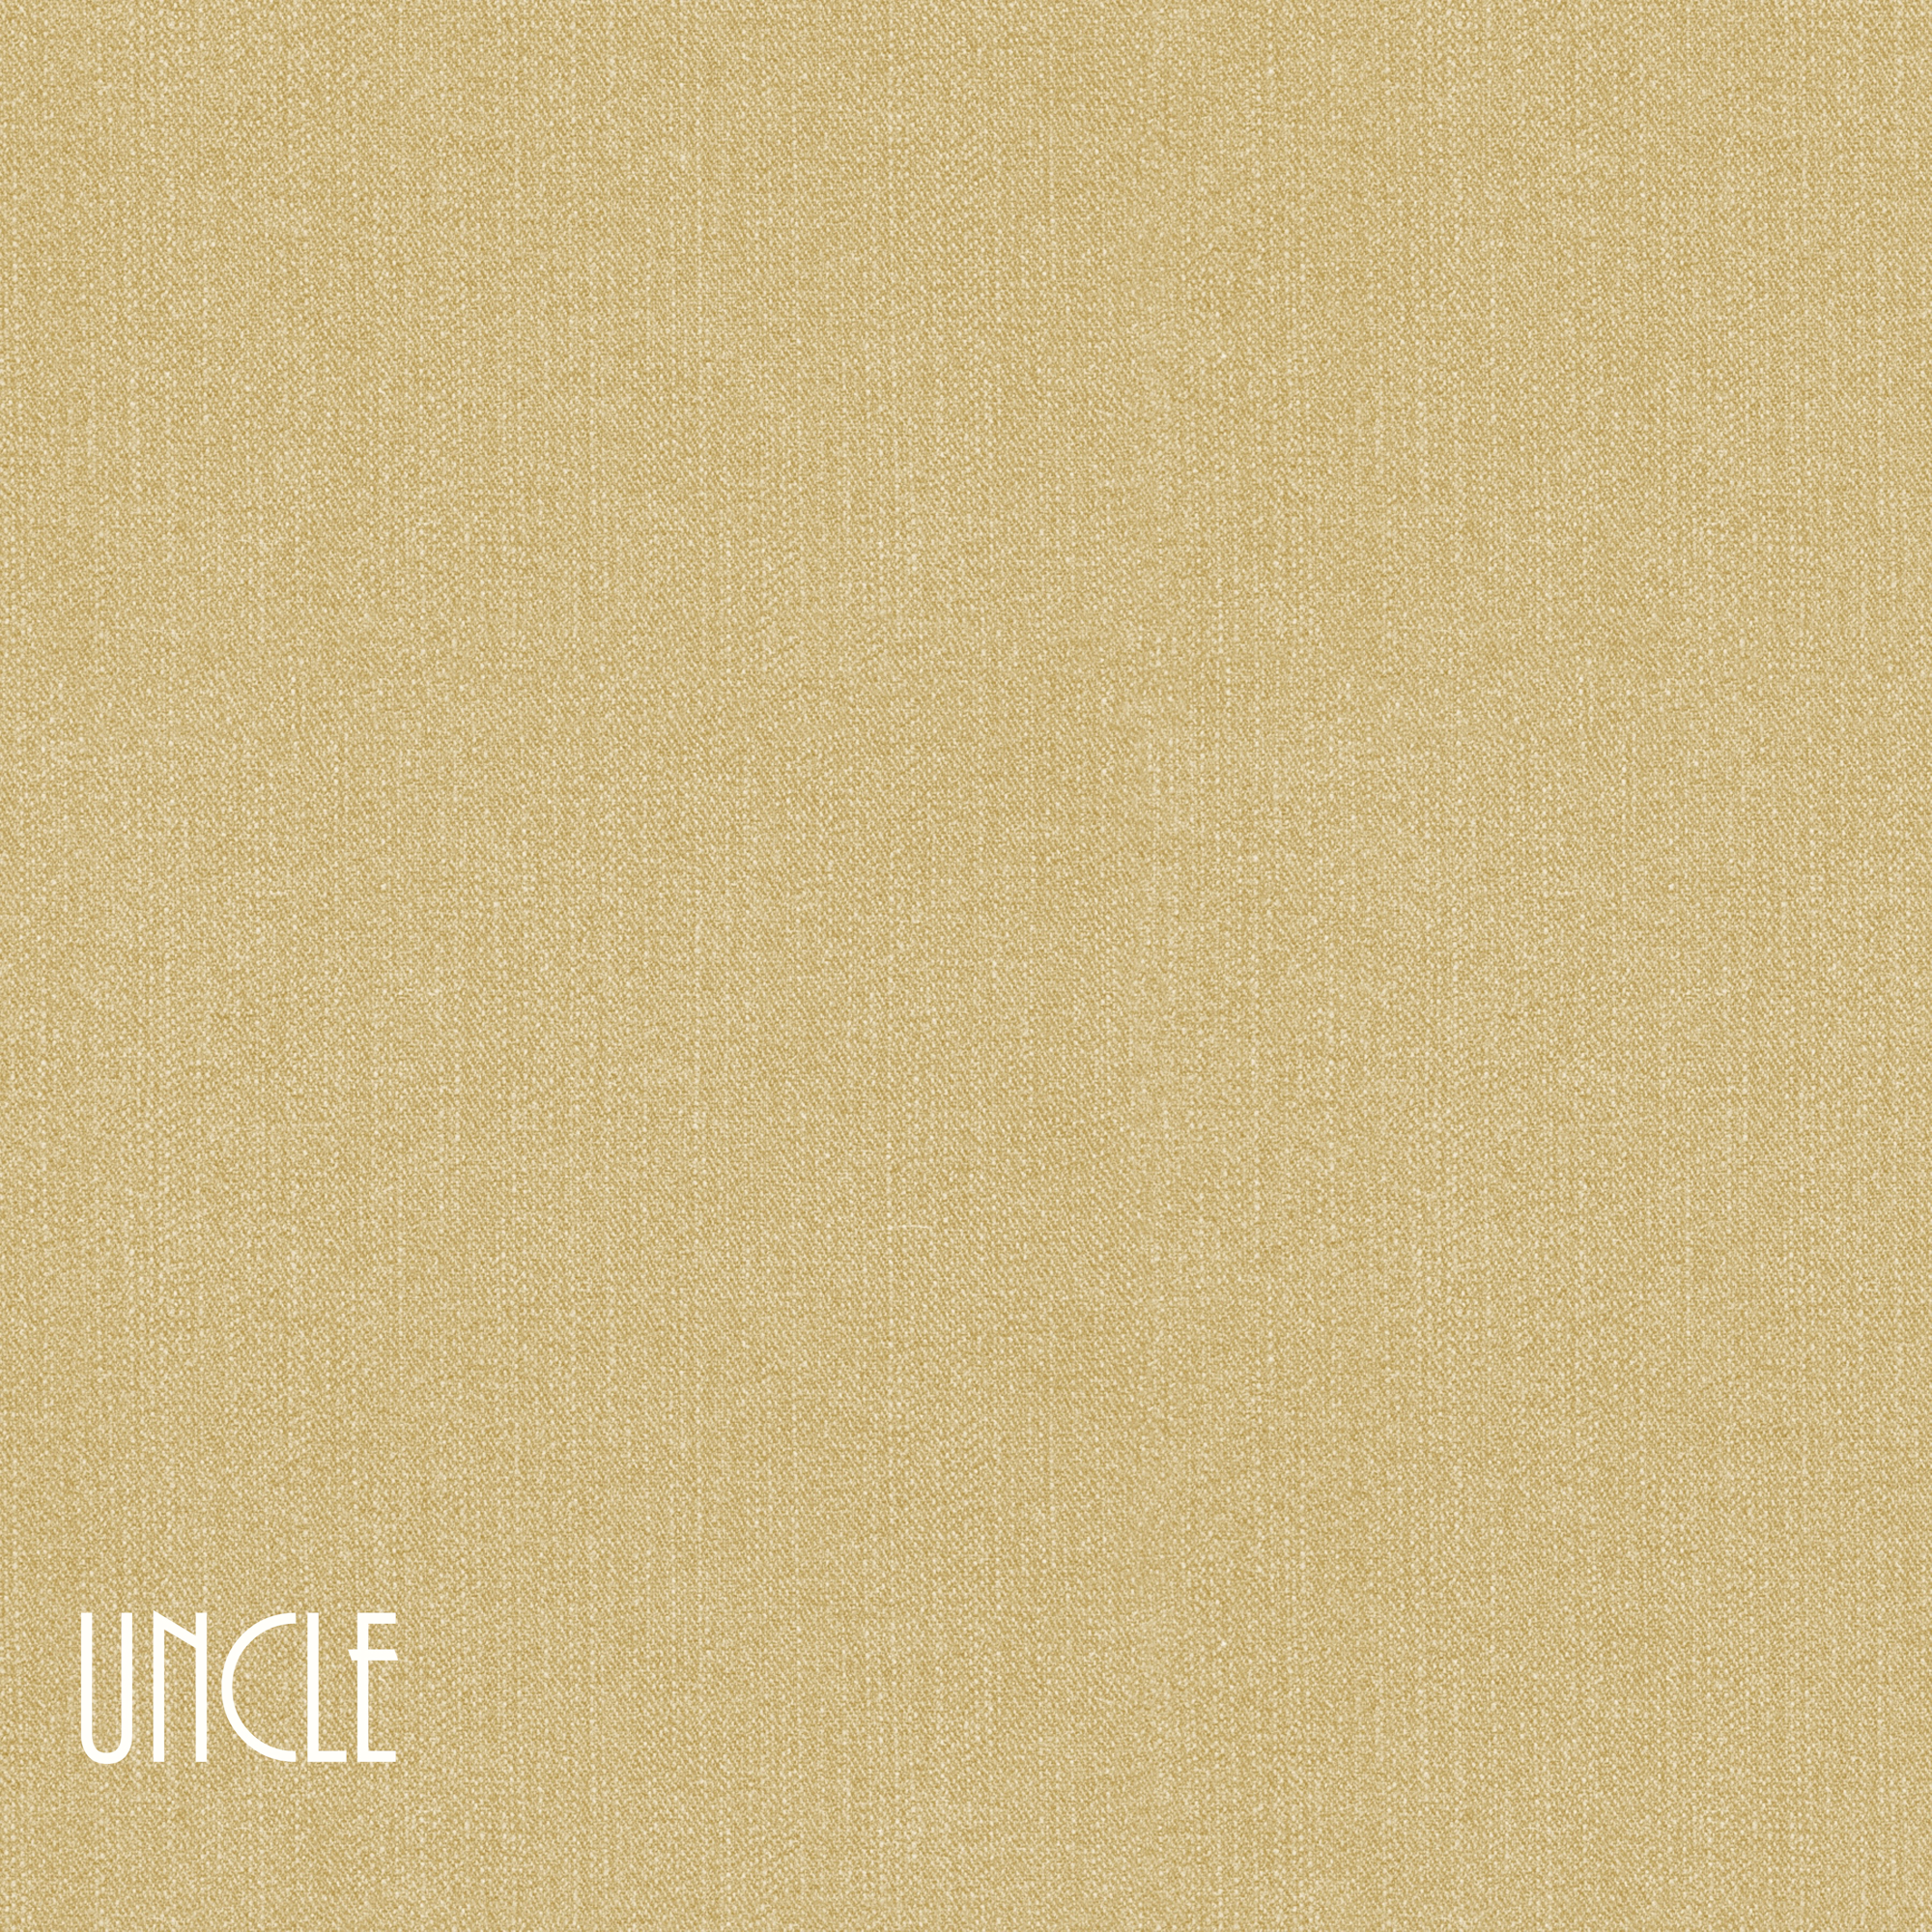 Family Collection Uncle 12 x 12 Double-Sided Scrapbook Paper by SSC Designs